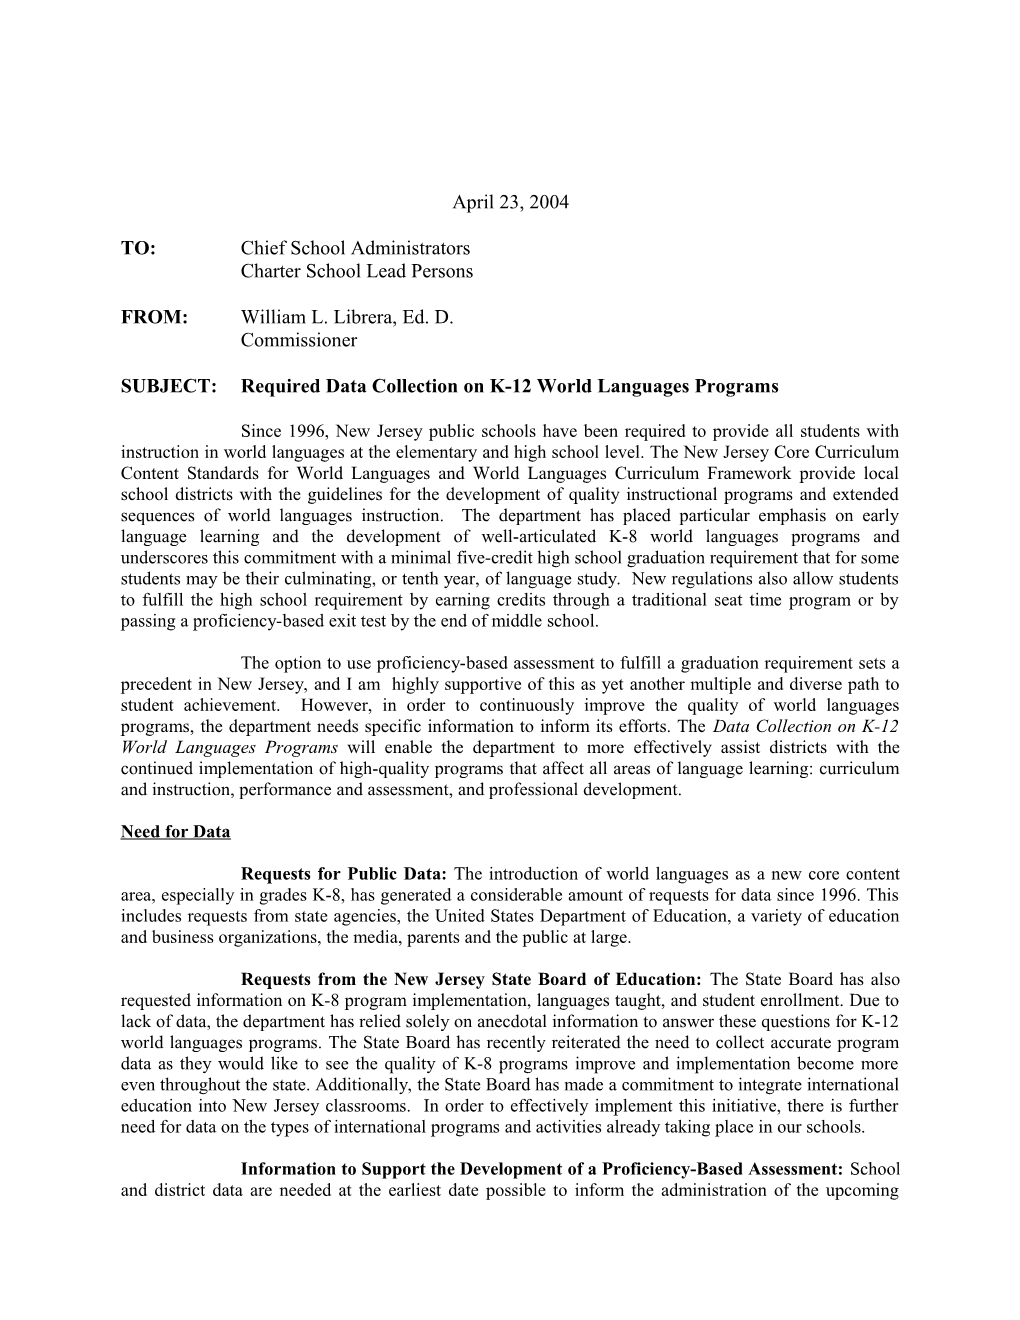 SUBJECT: Required Data Collection on K-12 World Languages Programs